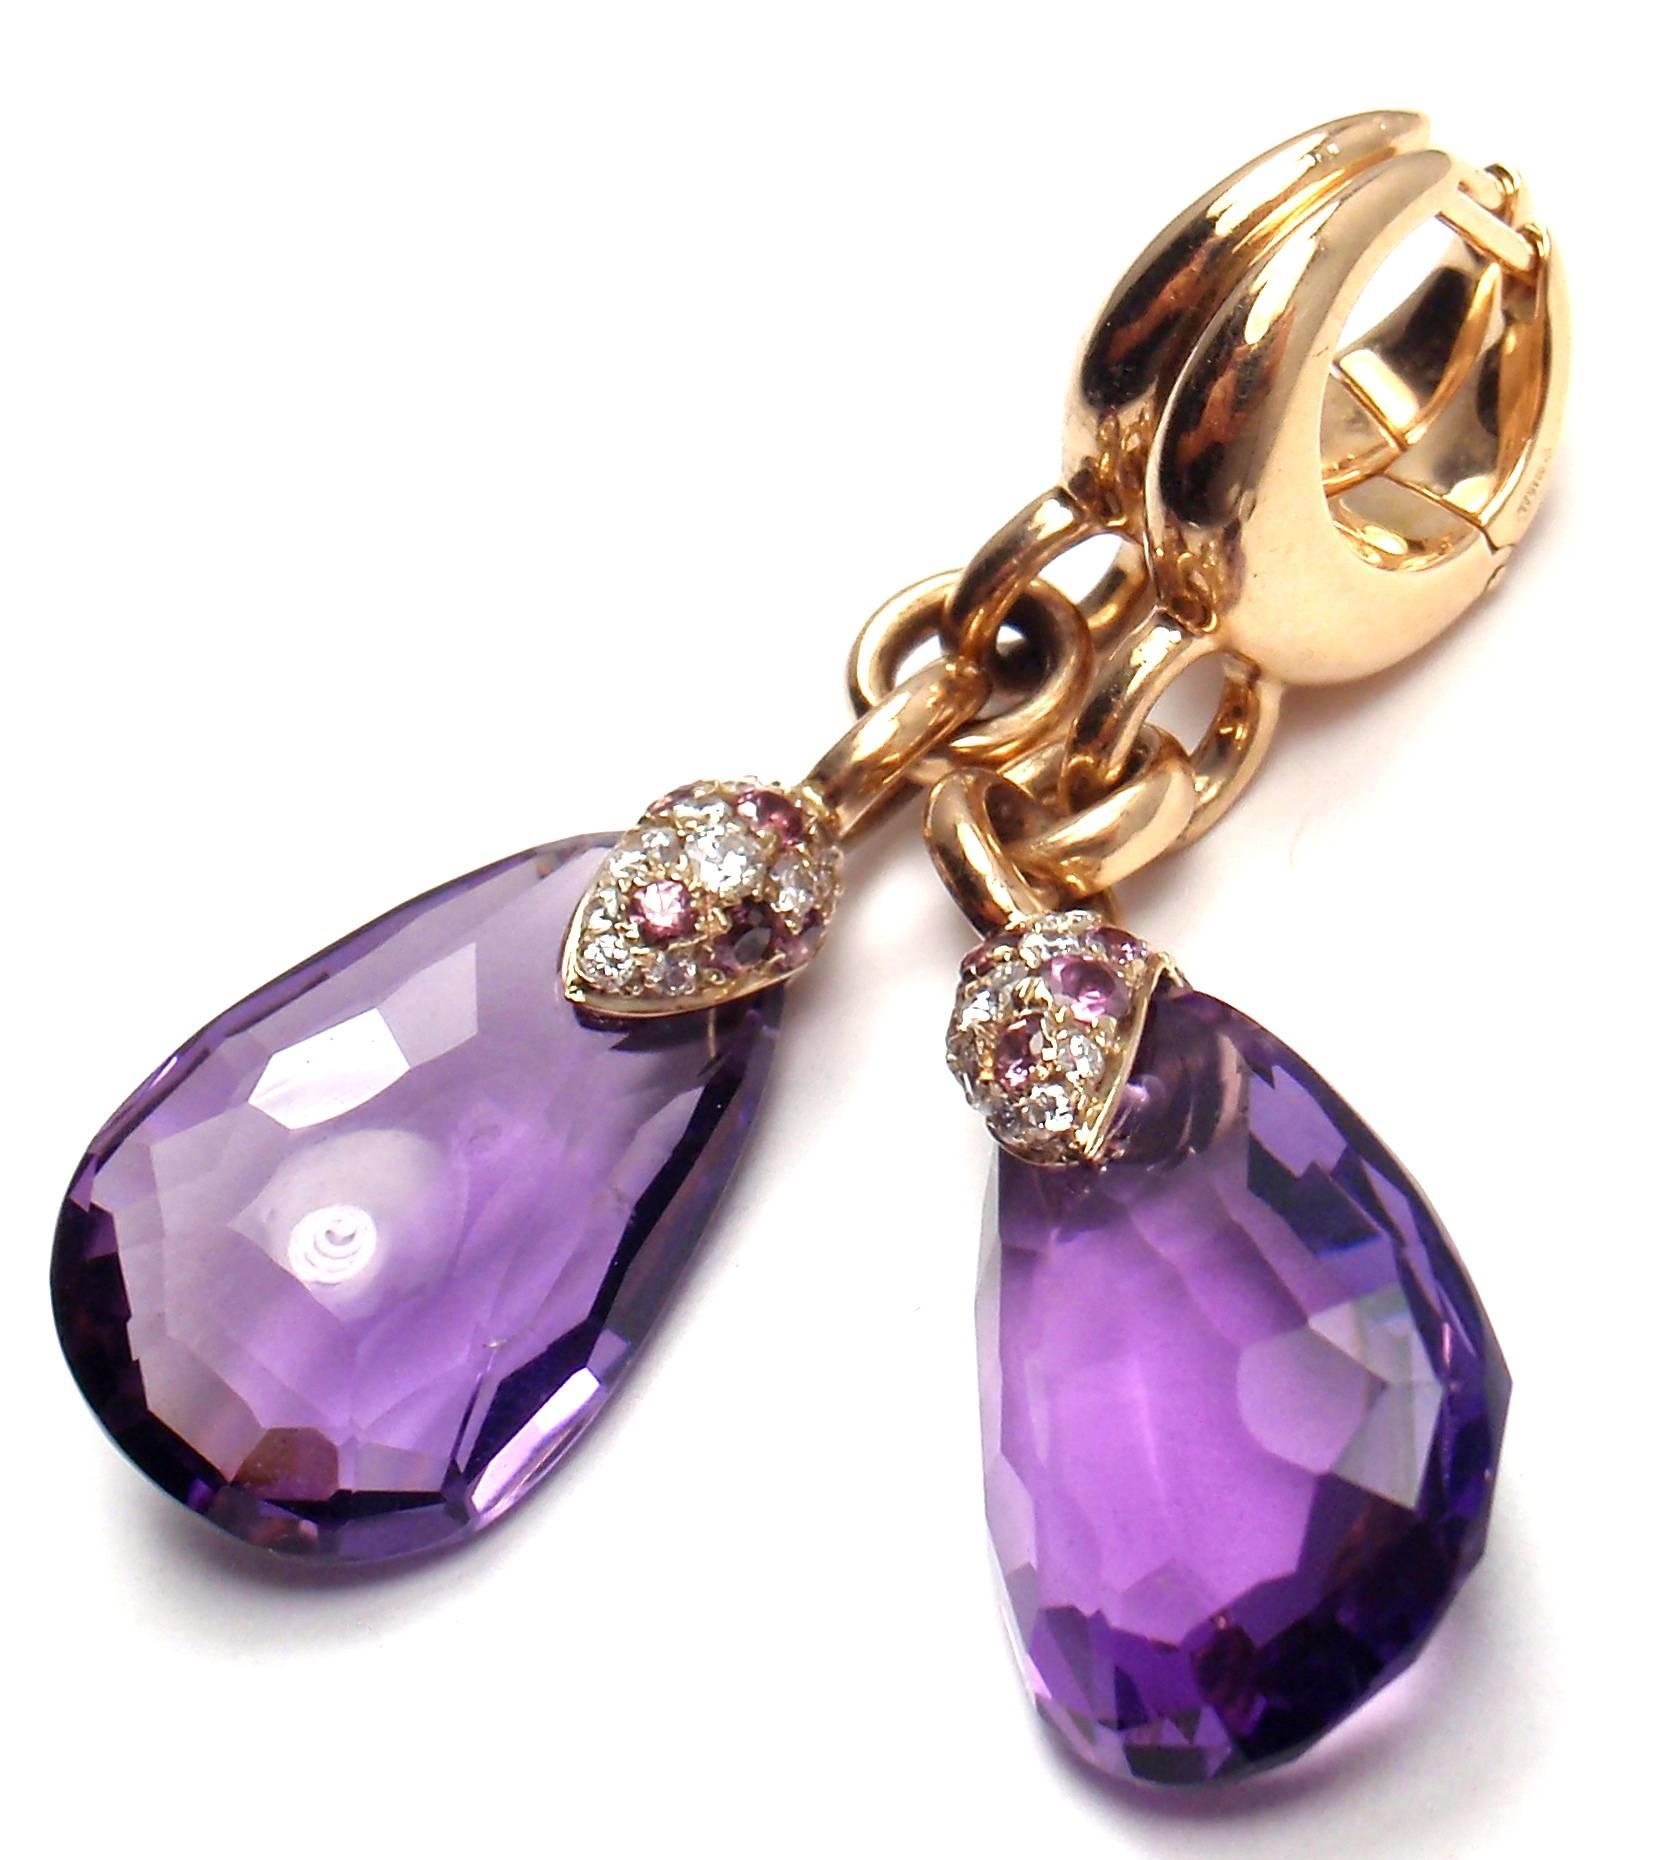 18k Yellow Gold Diamond Amethyst Earrings by Pomellato. 
These earrings come with an original Pomellato box and a certificate. 
With diamonds total weight approx. .25ct
2 large amethysts approx. 7ct

Details: 
Measurements: 1 3/4